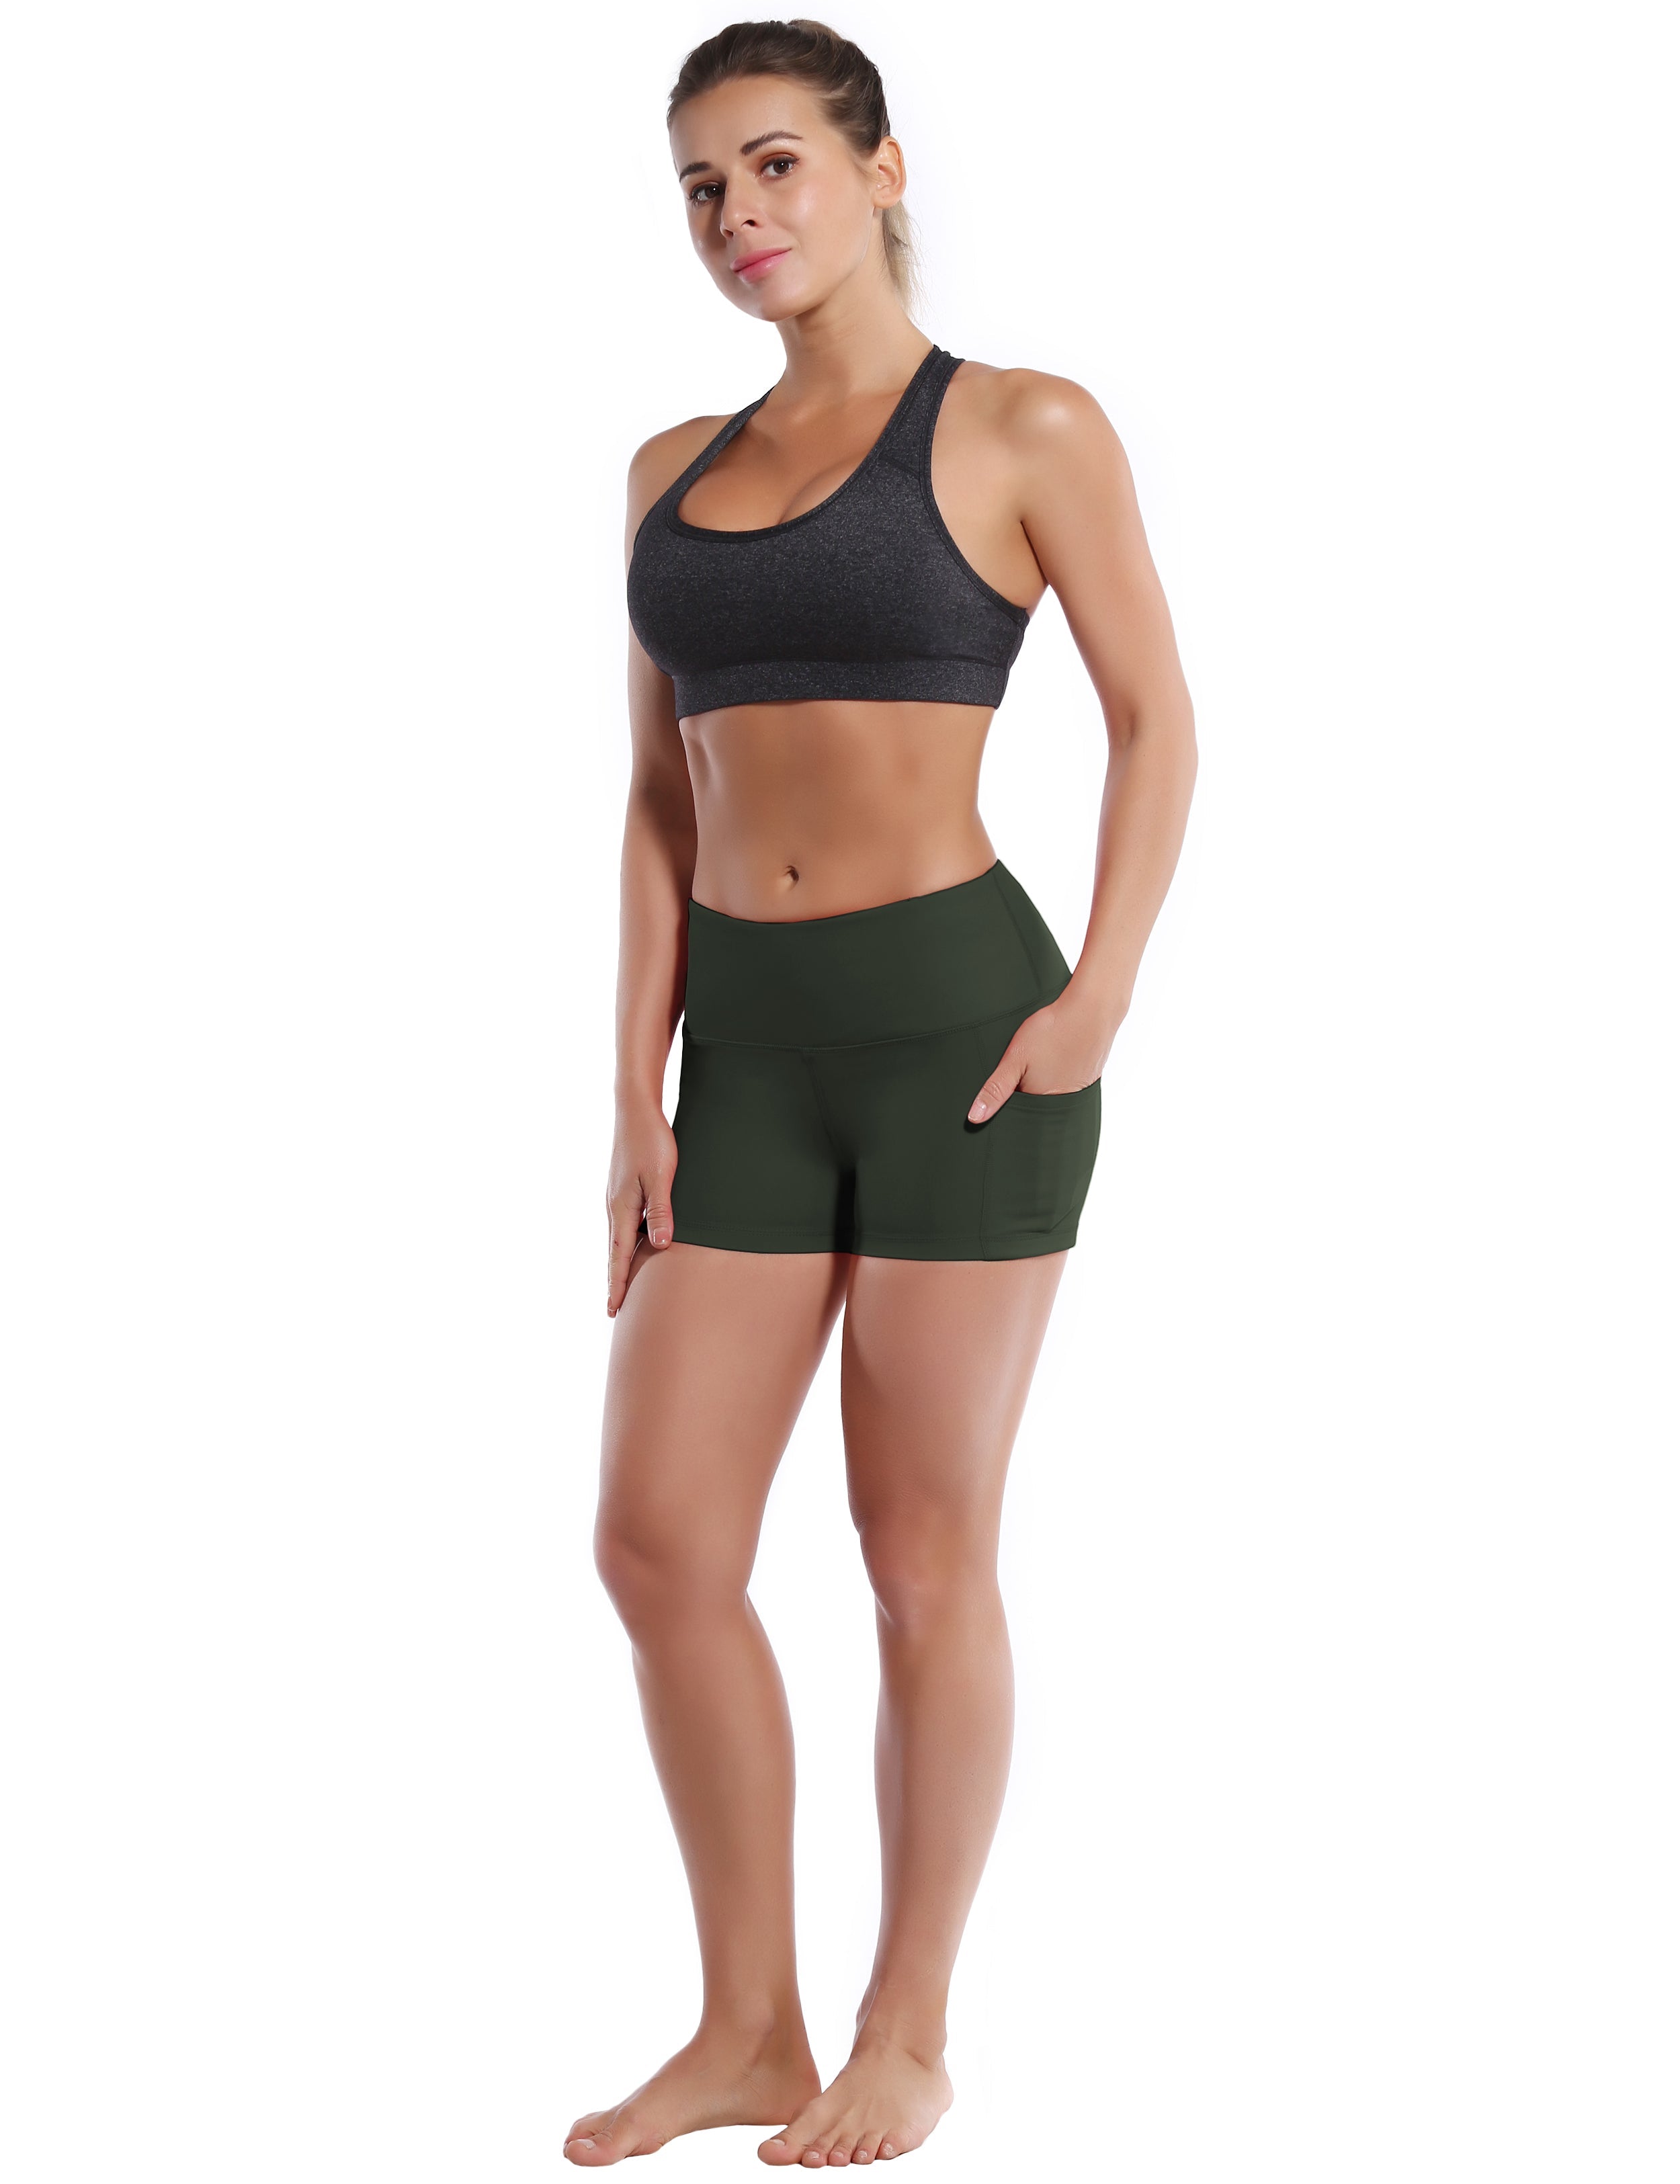 2.5" Side Pockets Biking Shorts olivegray Sleek, soft, smooth and totally comfortable: our newest sexy style is here. Softest-ever fabric High elasticity High density 4-way stretch Fabric doesn't attract lint easily No see-through Moisture-wicking Machine wash 78% Polyester, 22% Spandex